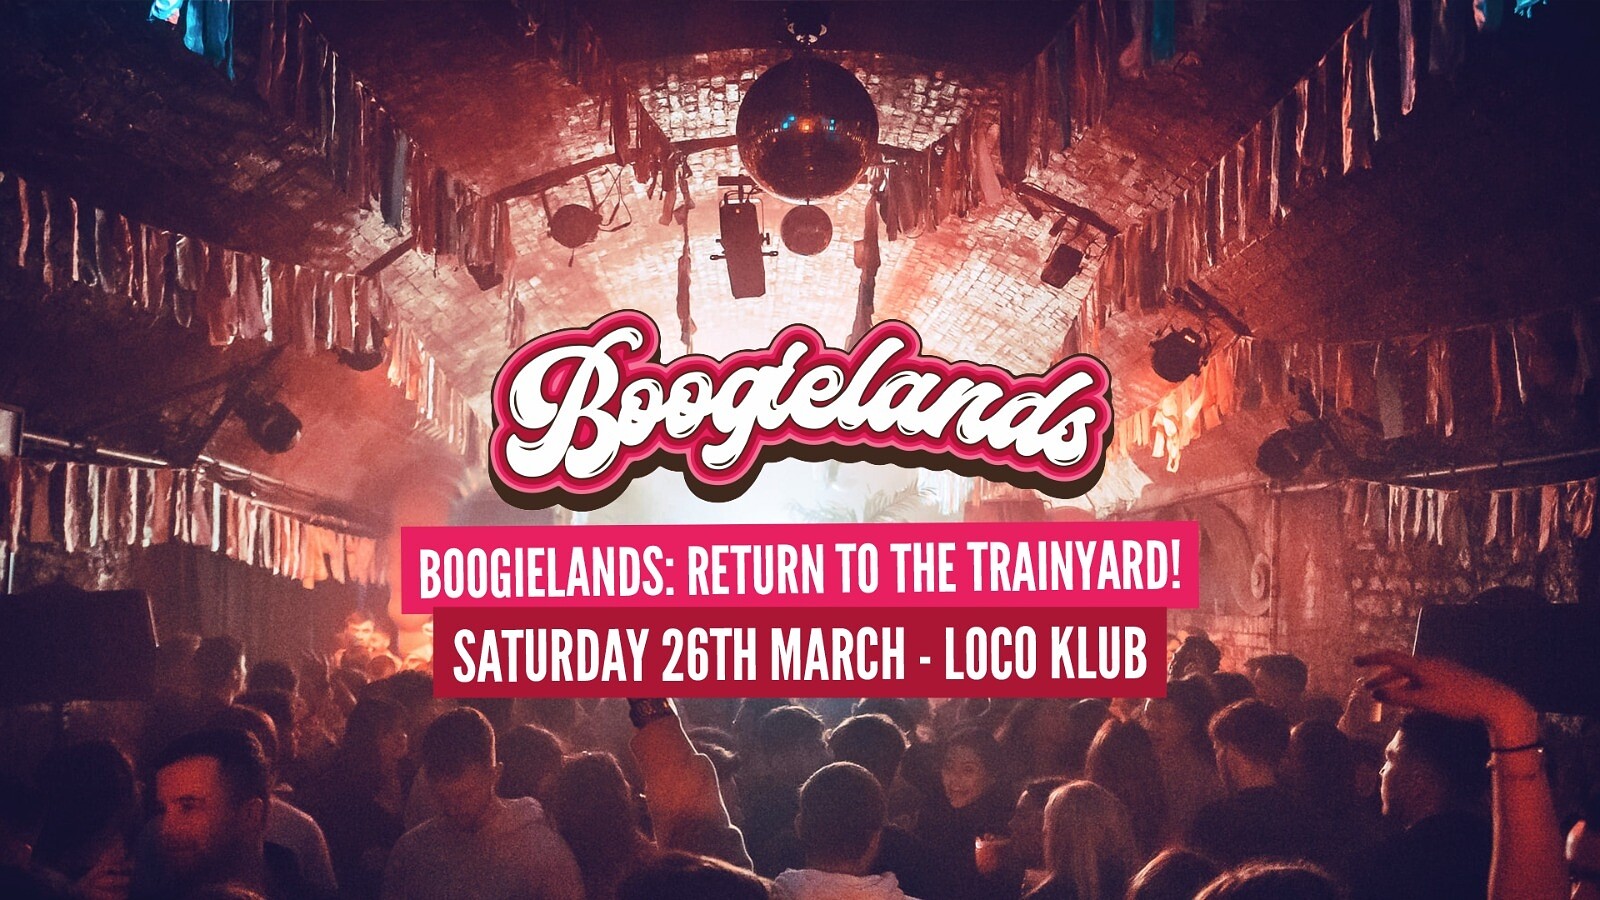 Boogielands • Return to the Trainyard at The Loco Klub